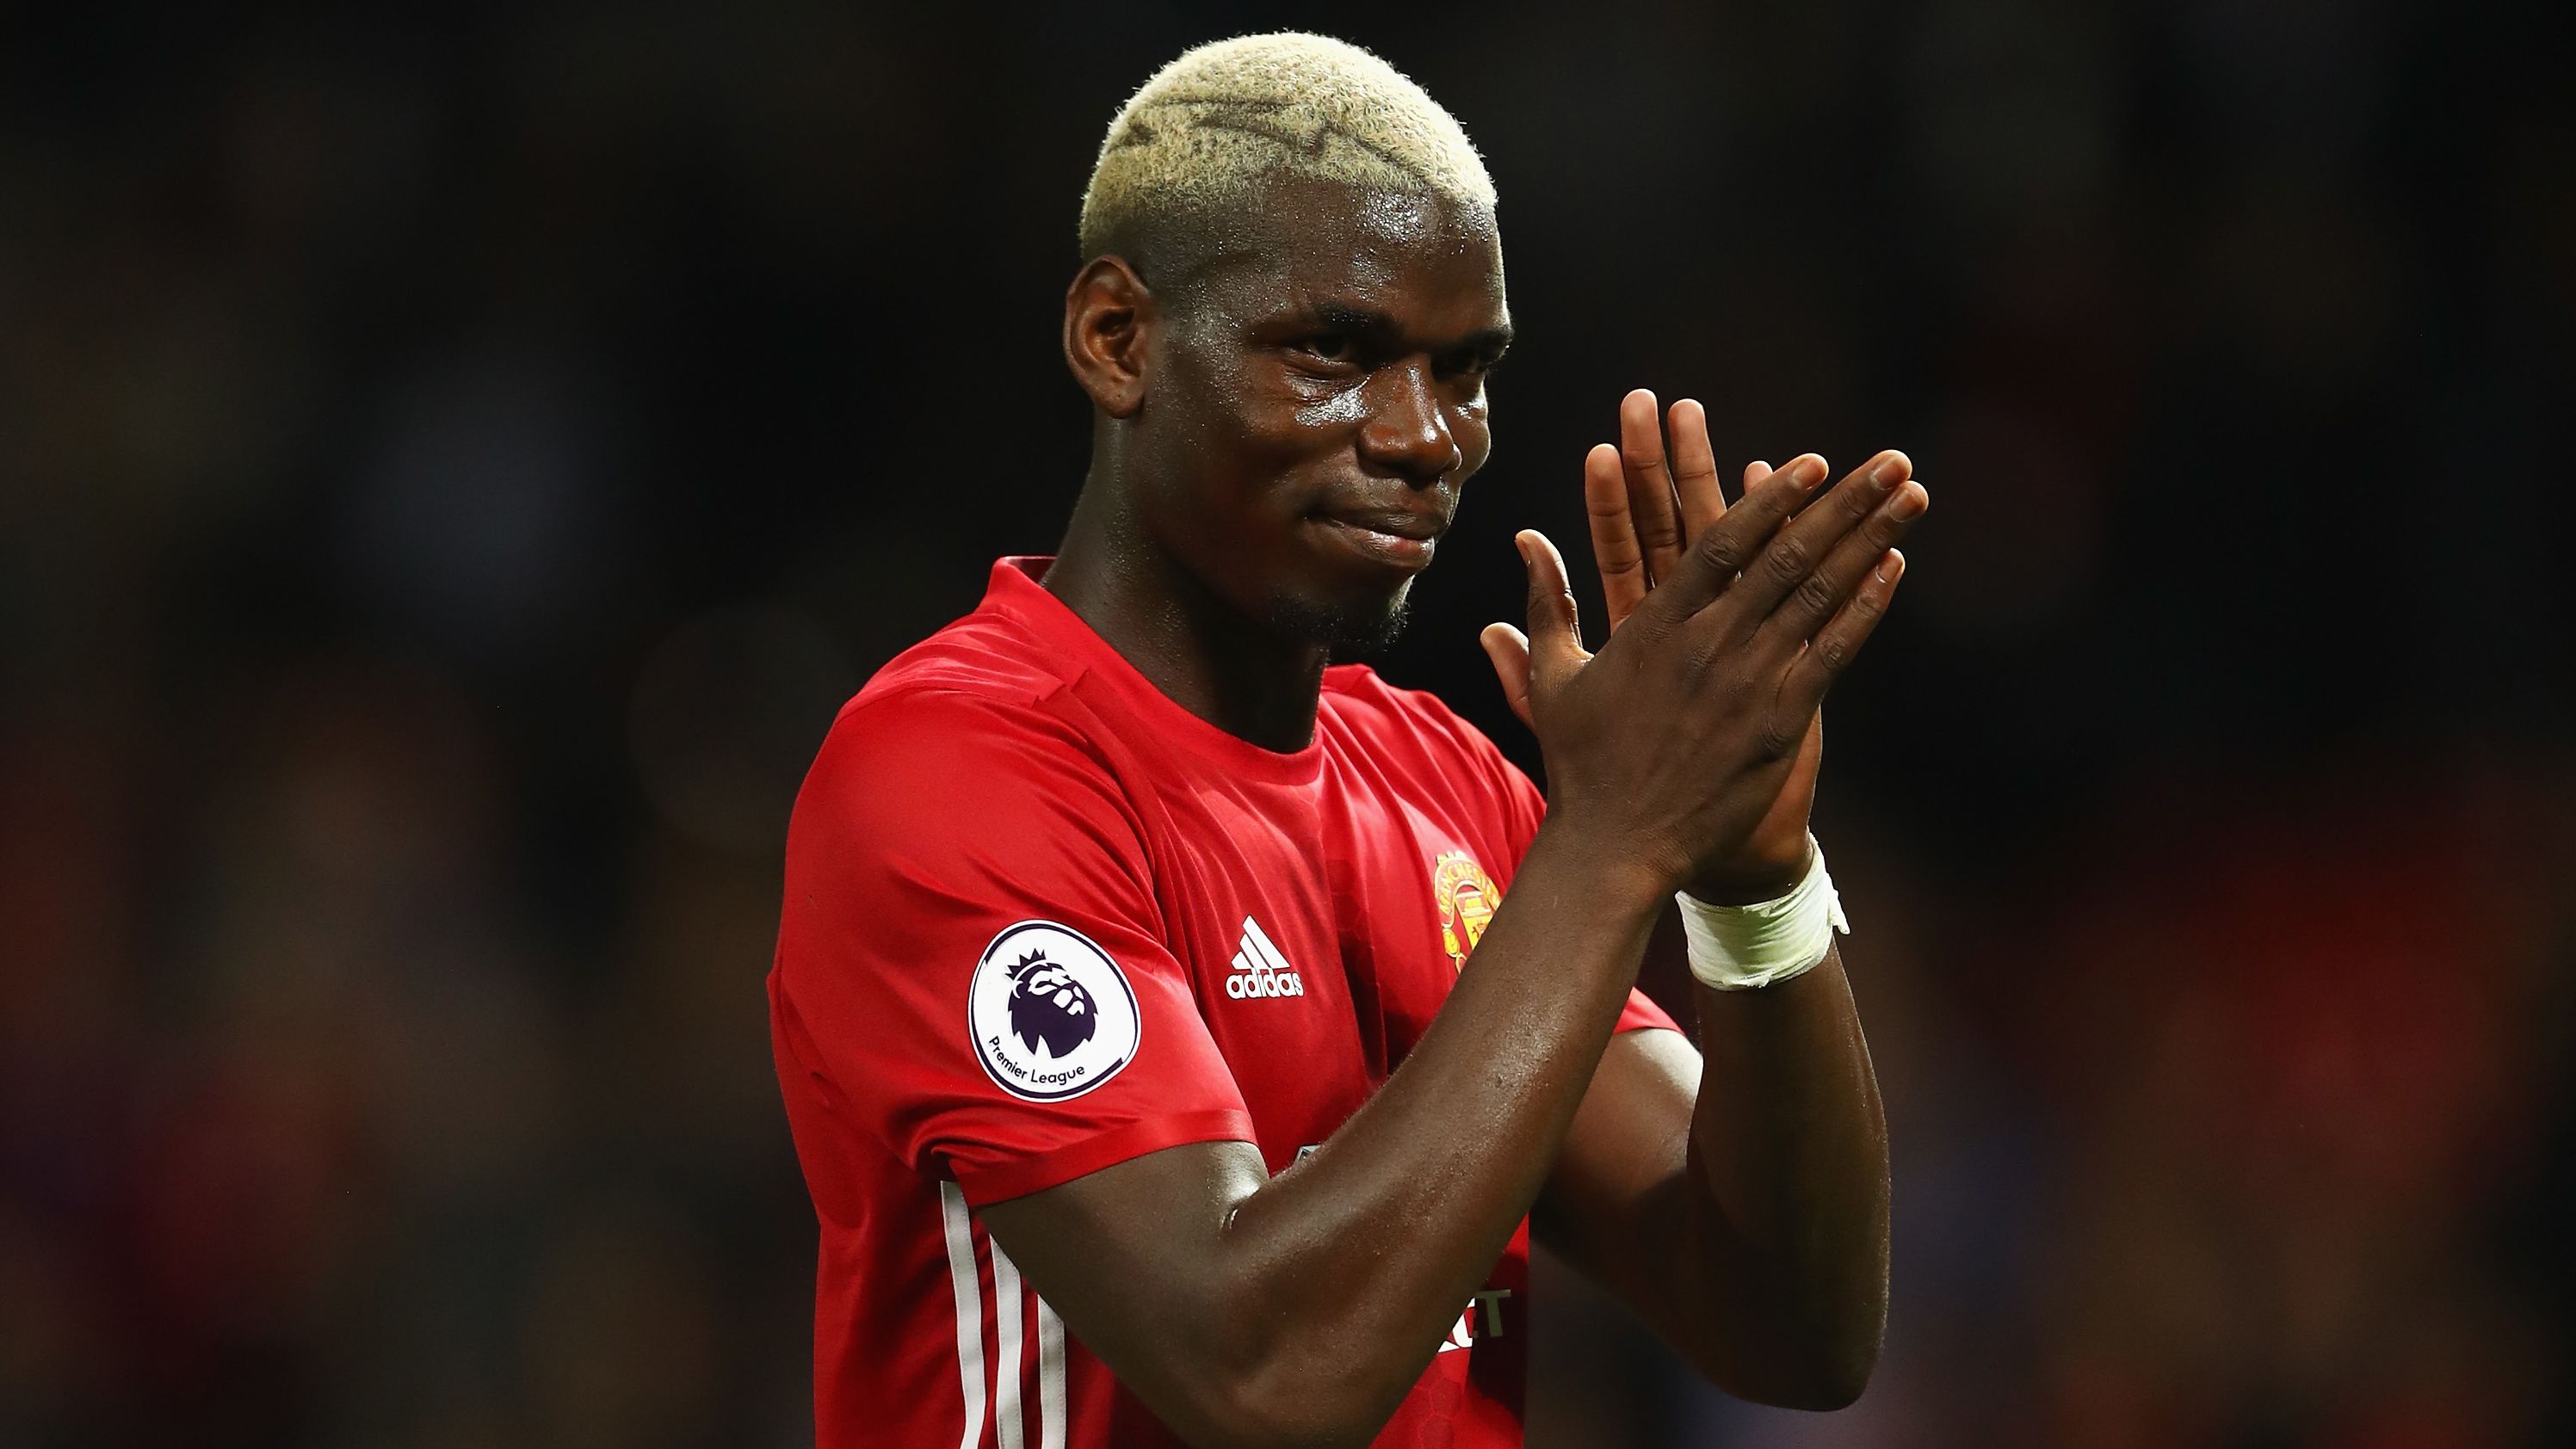 Four years after he left for Juventus without a Premier League start to his name, Pogba's second Manchester United debut was promising, with the Frenchman registering more touches and passes in the opposition's half than any other player. 